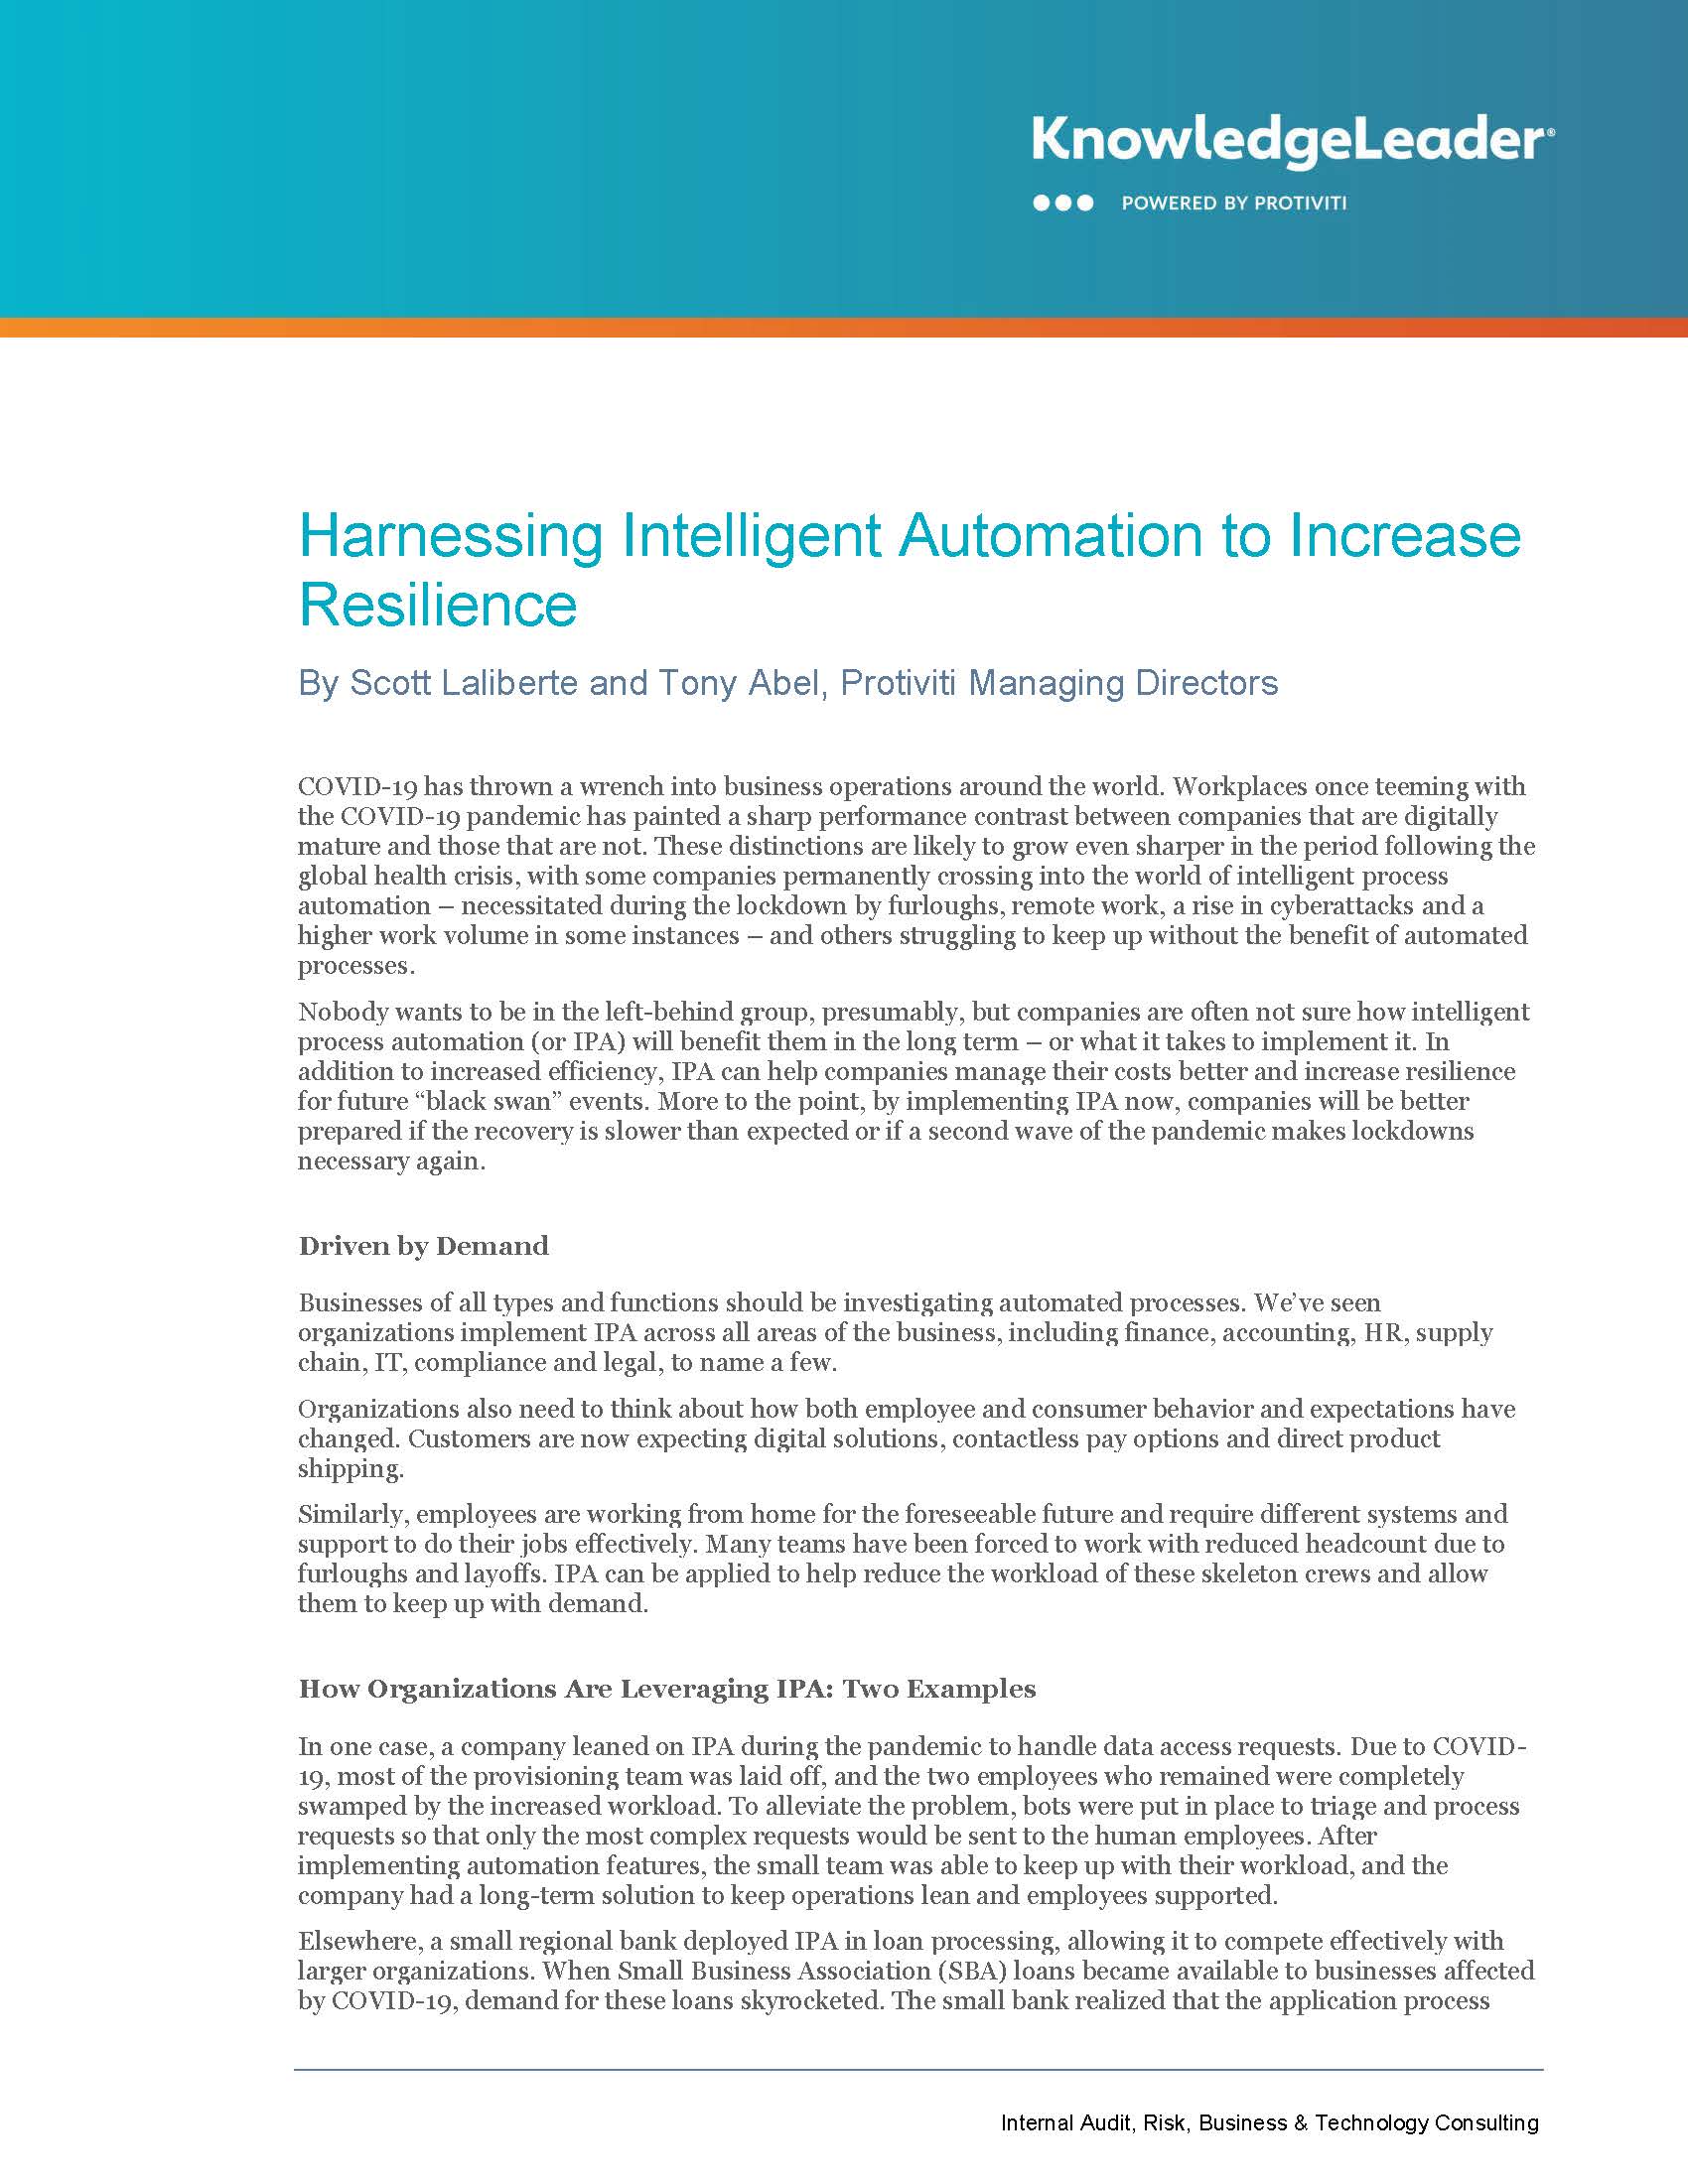 Screenshot of the first page of Harnessing Intelligent Automation to Increase Resilience